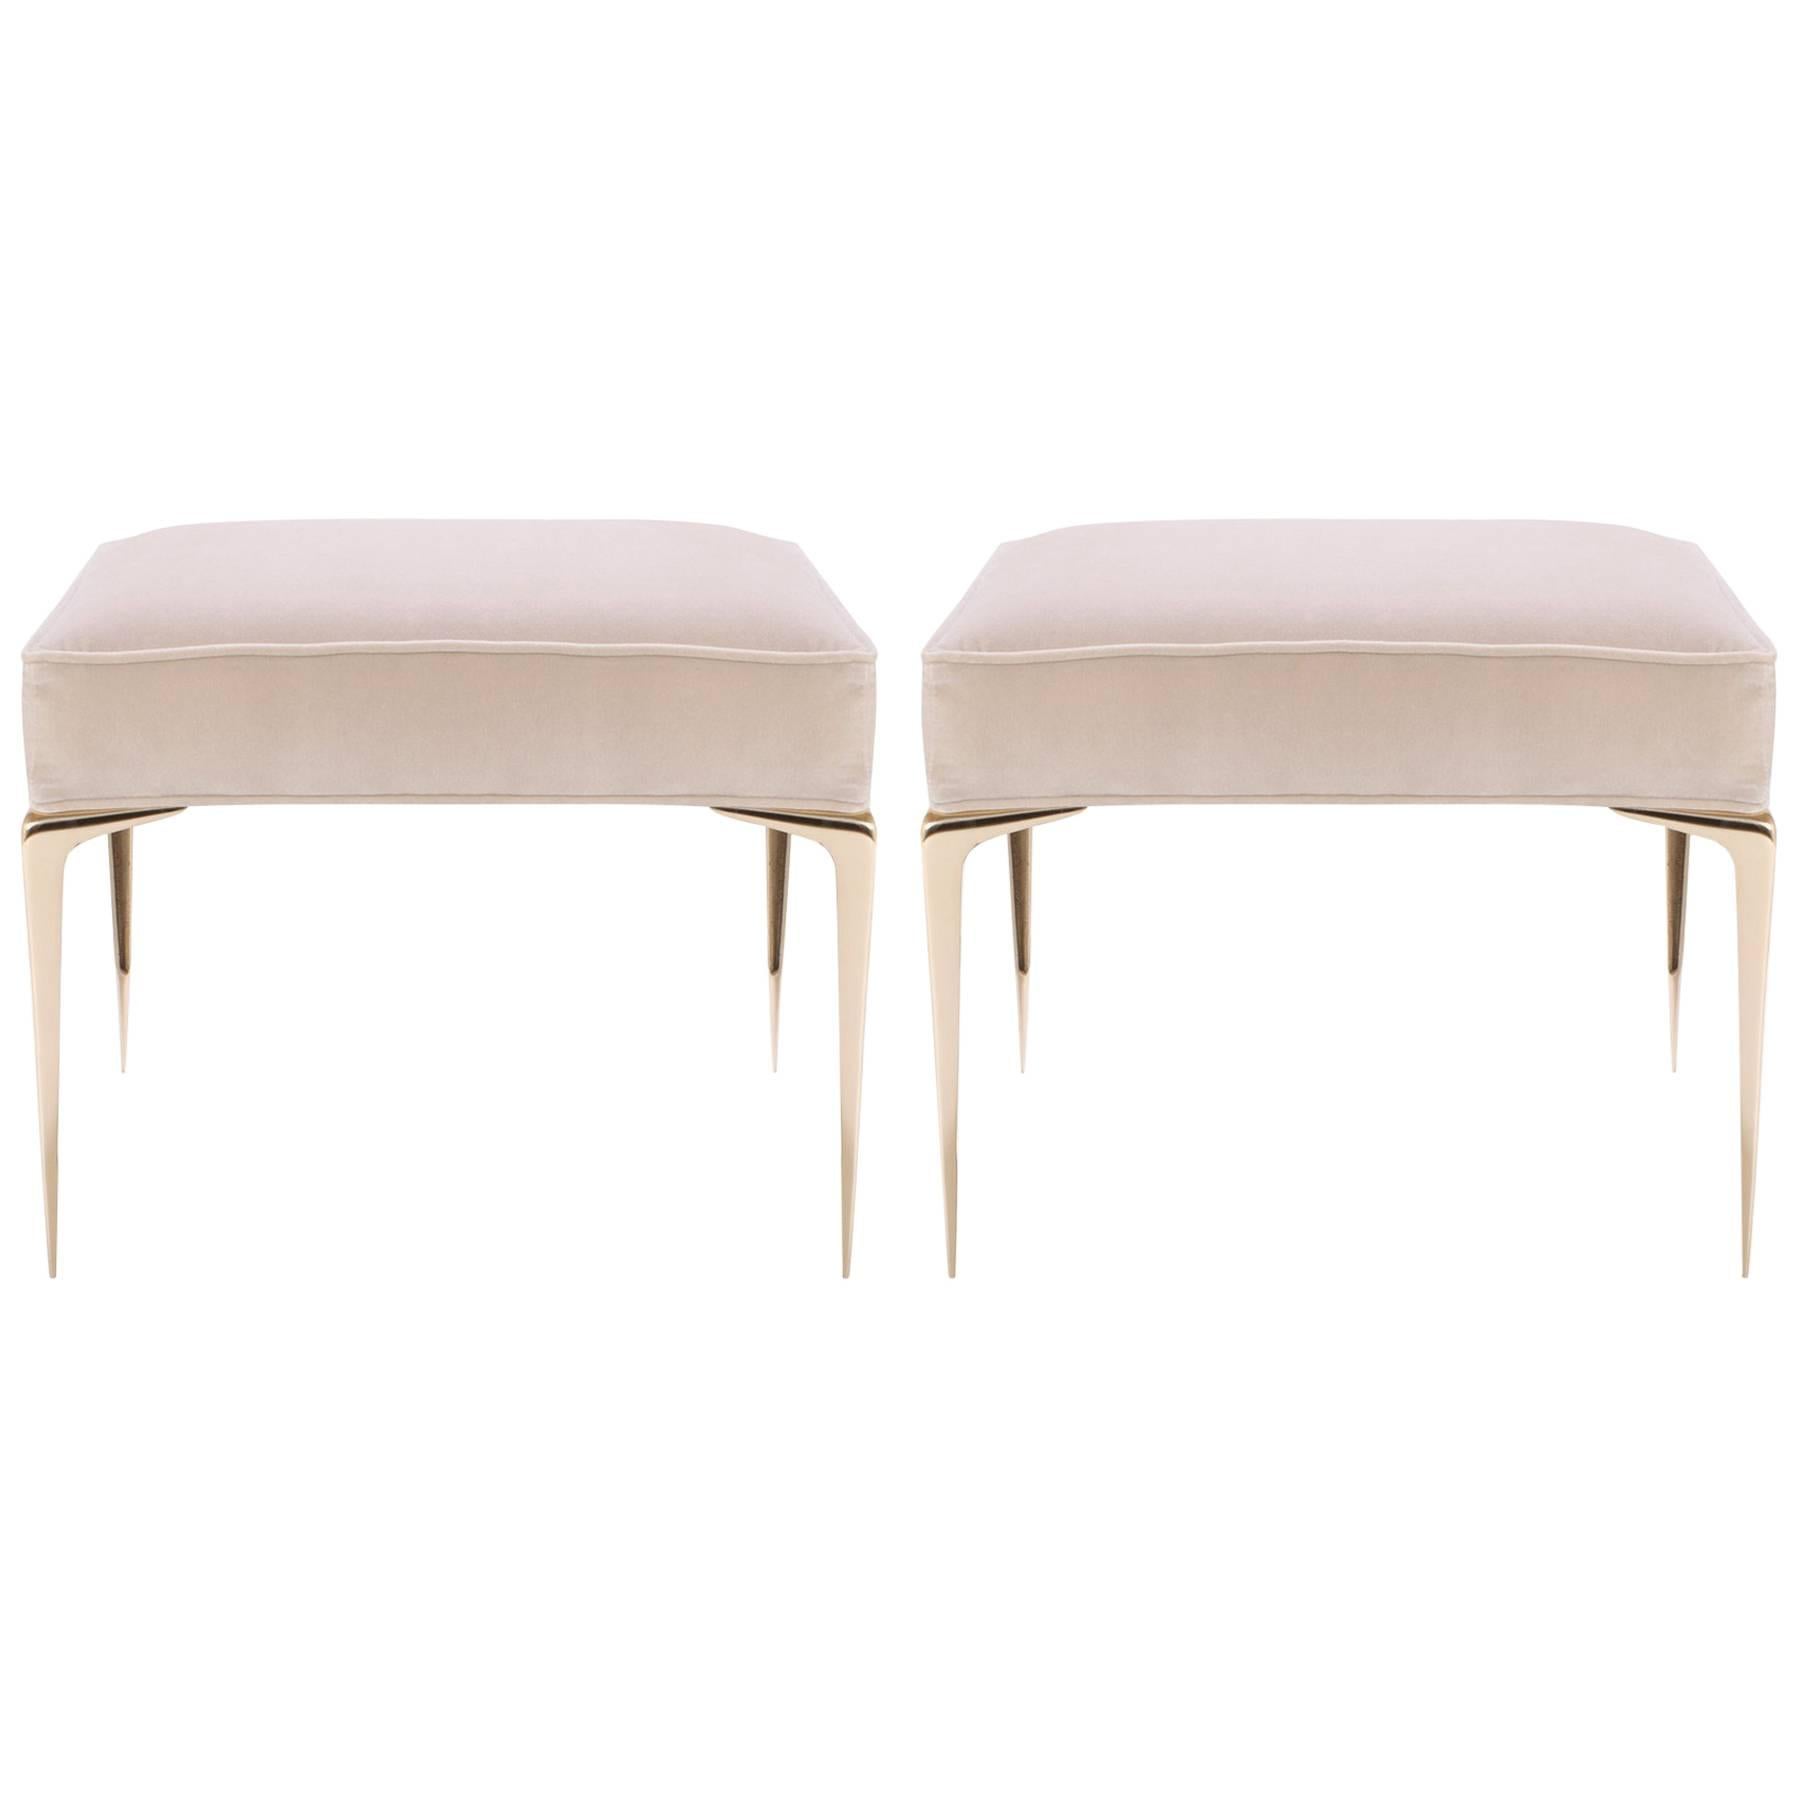 Colette Brass Ottomans in Nude Velvet by Montage, Pair